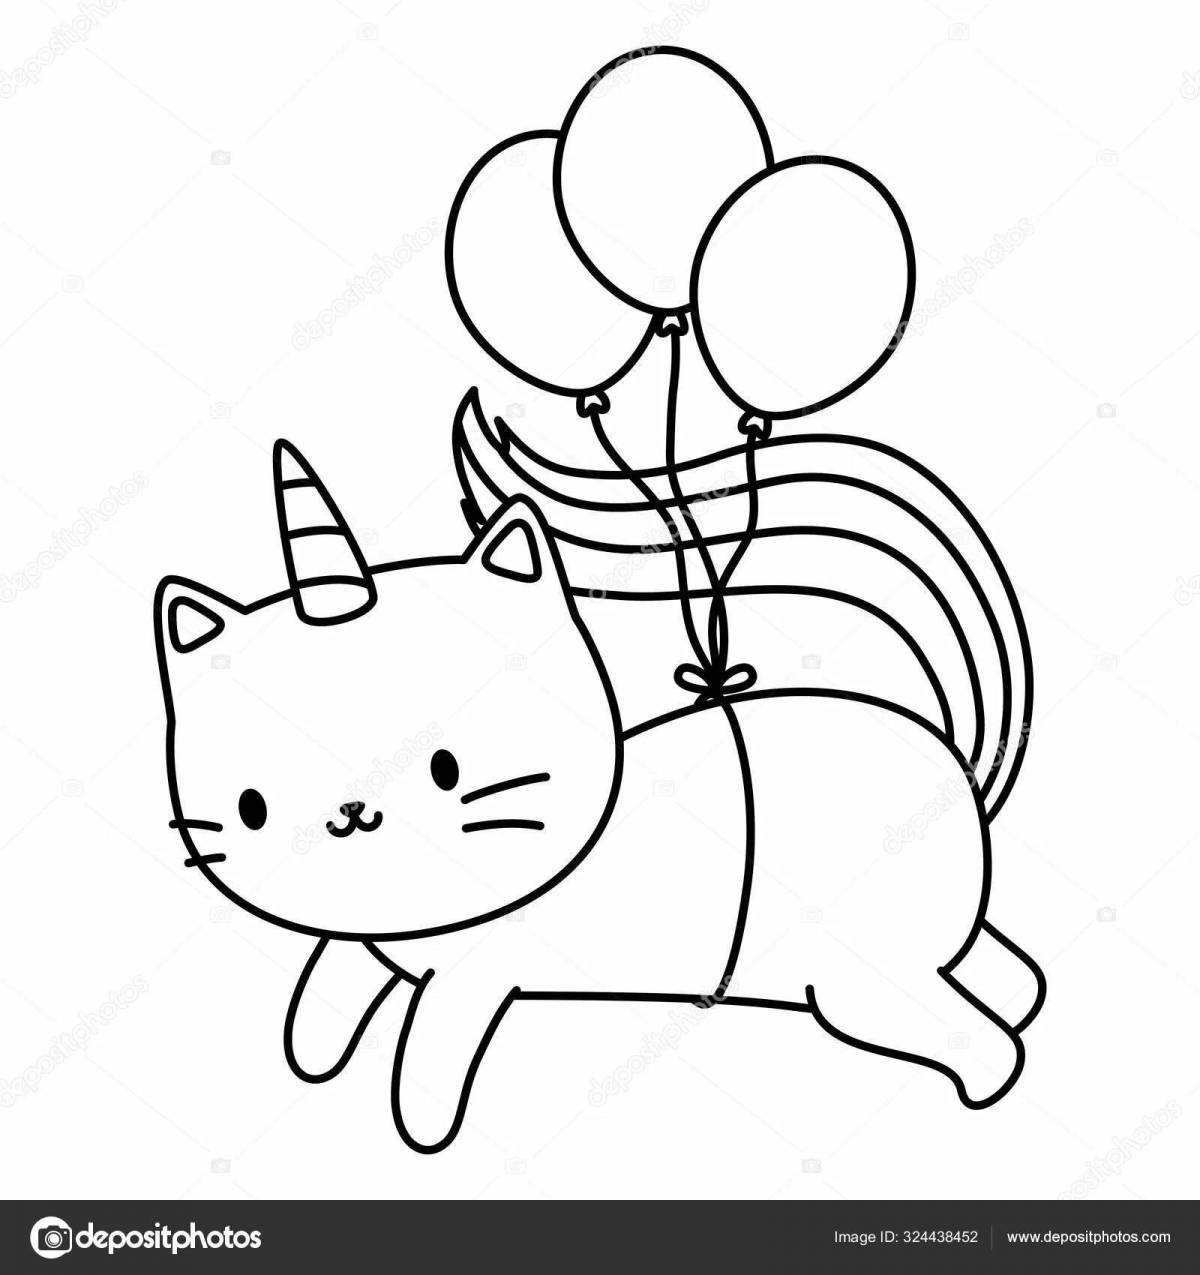 Colorful cat with balloons